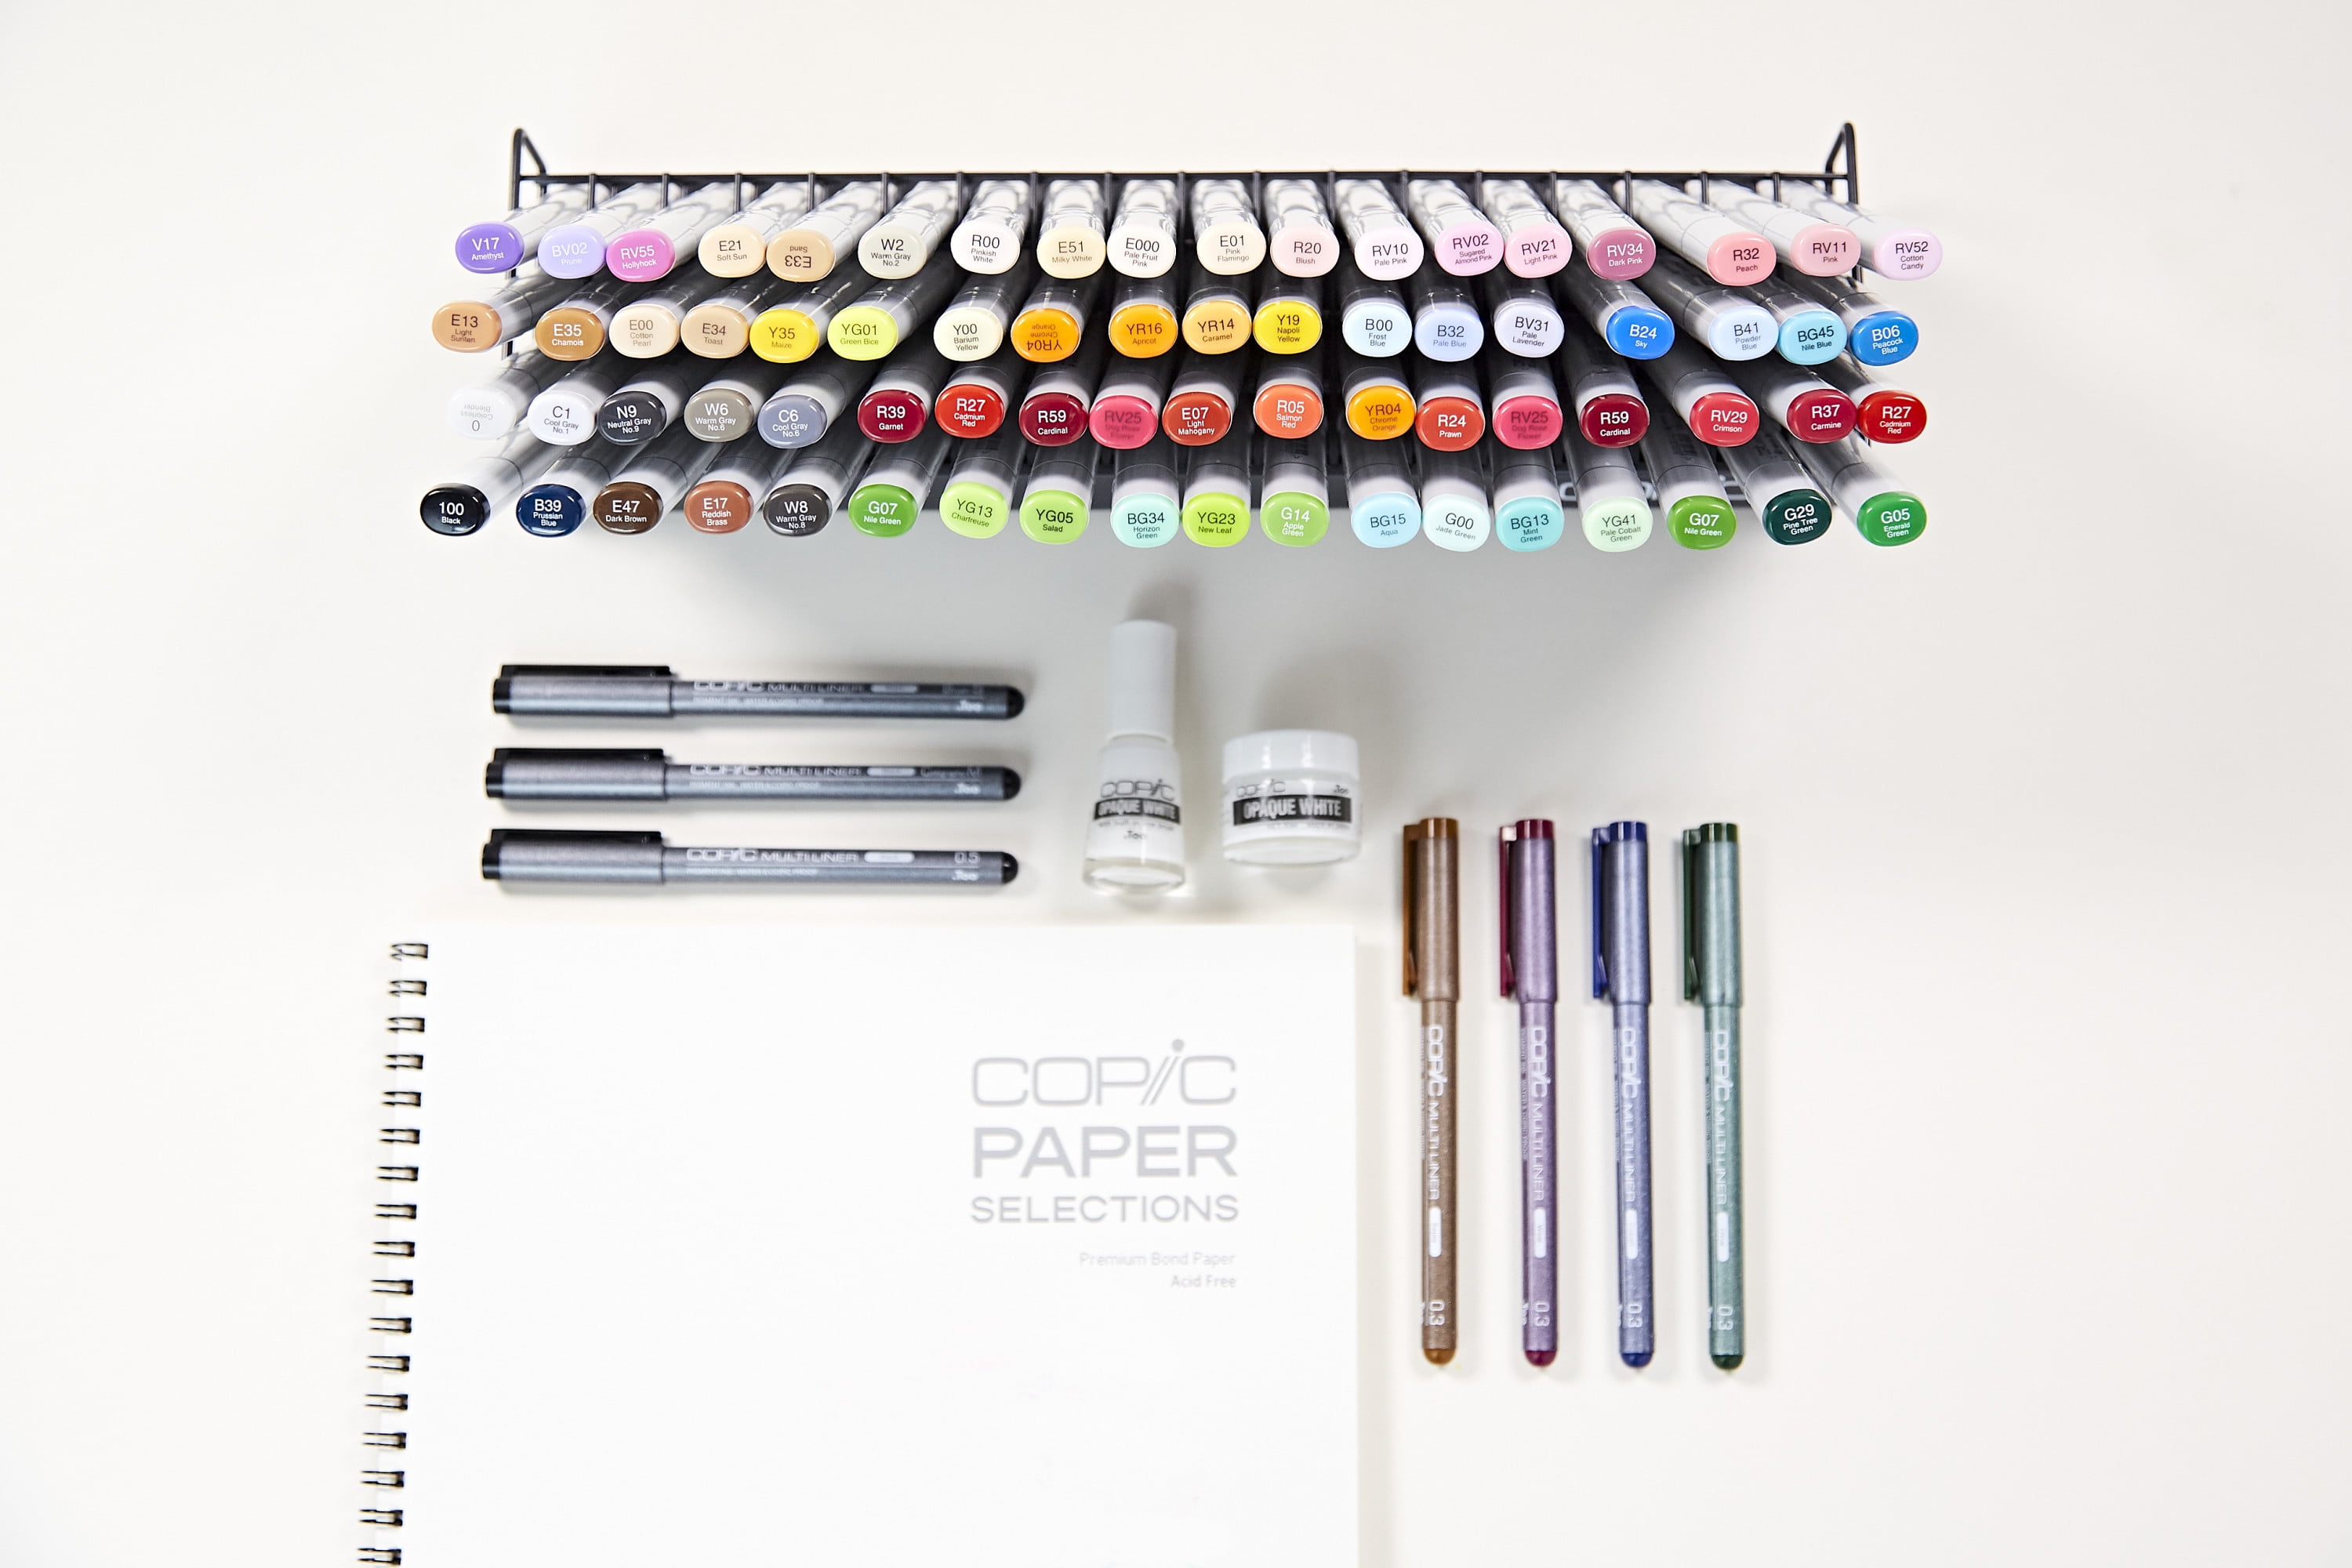 Copic Marker TOO Corp Sketchbook 4x4 30 Sheets